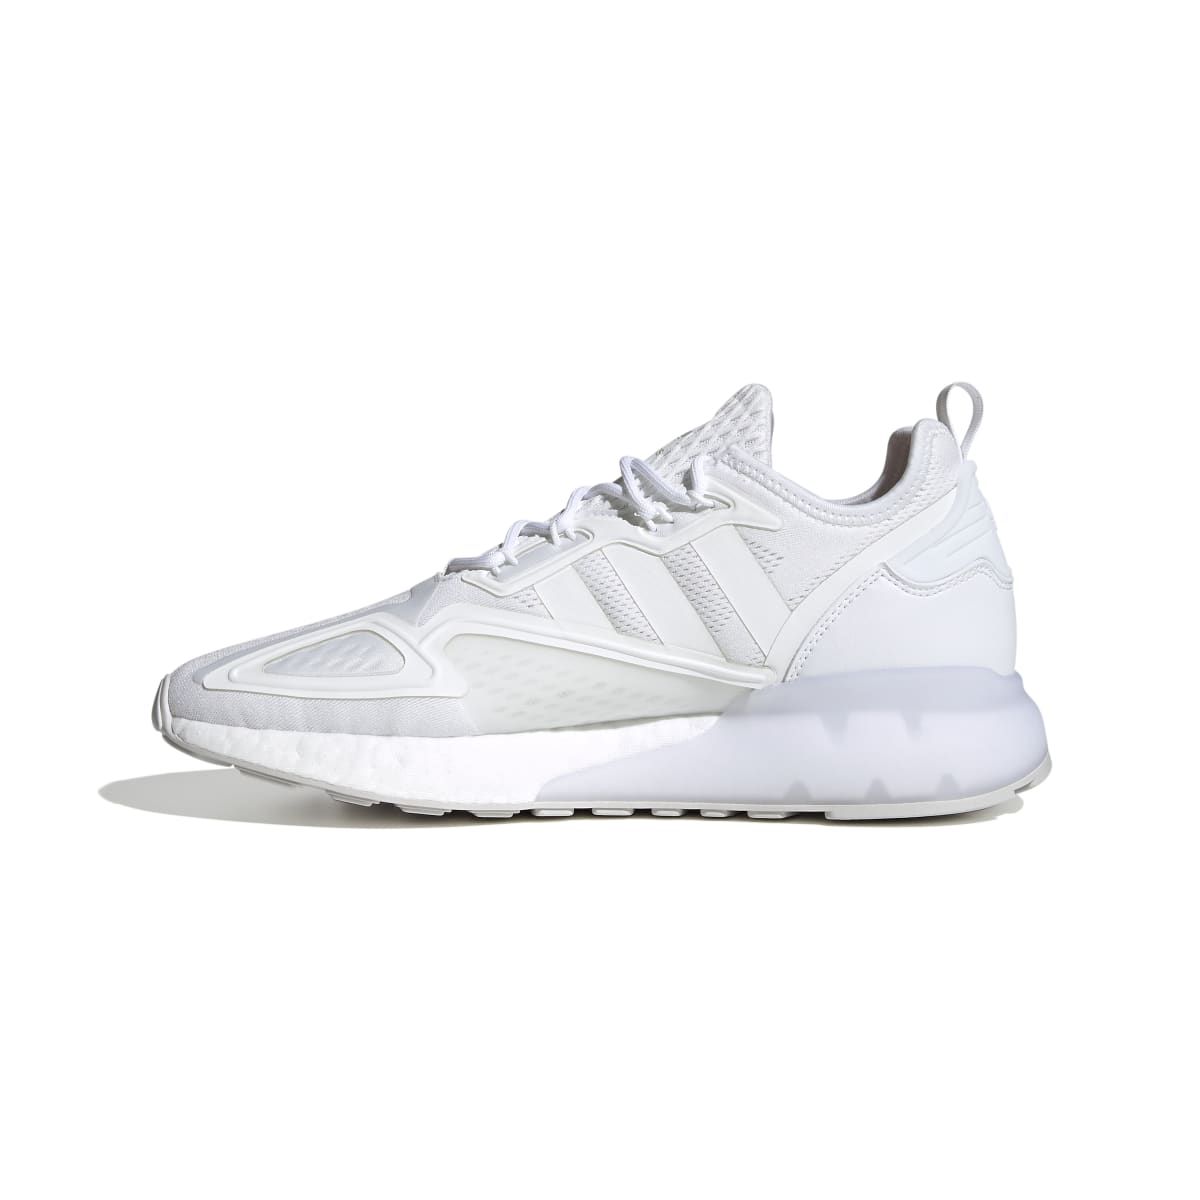 White adidas Originals Mens ZX 2K Boost Trainers - Get The Label